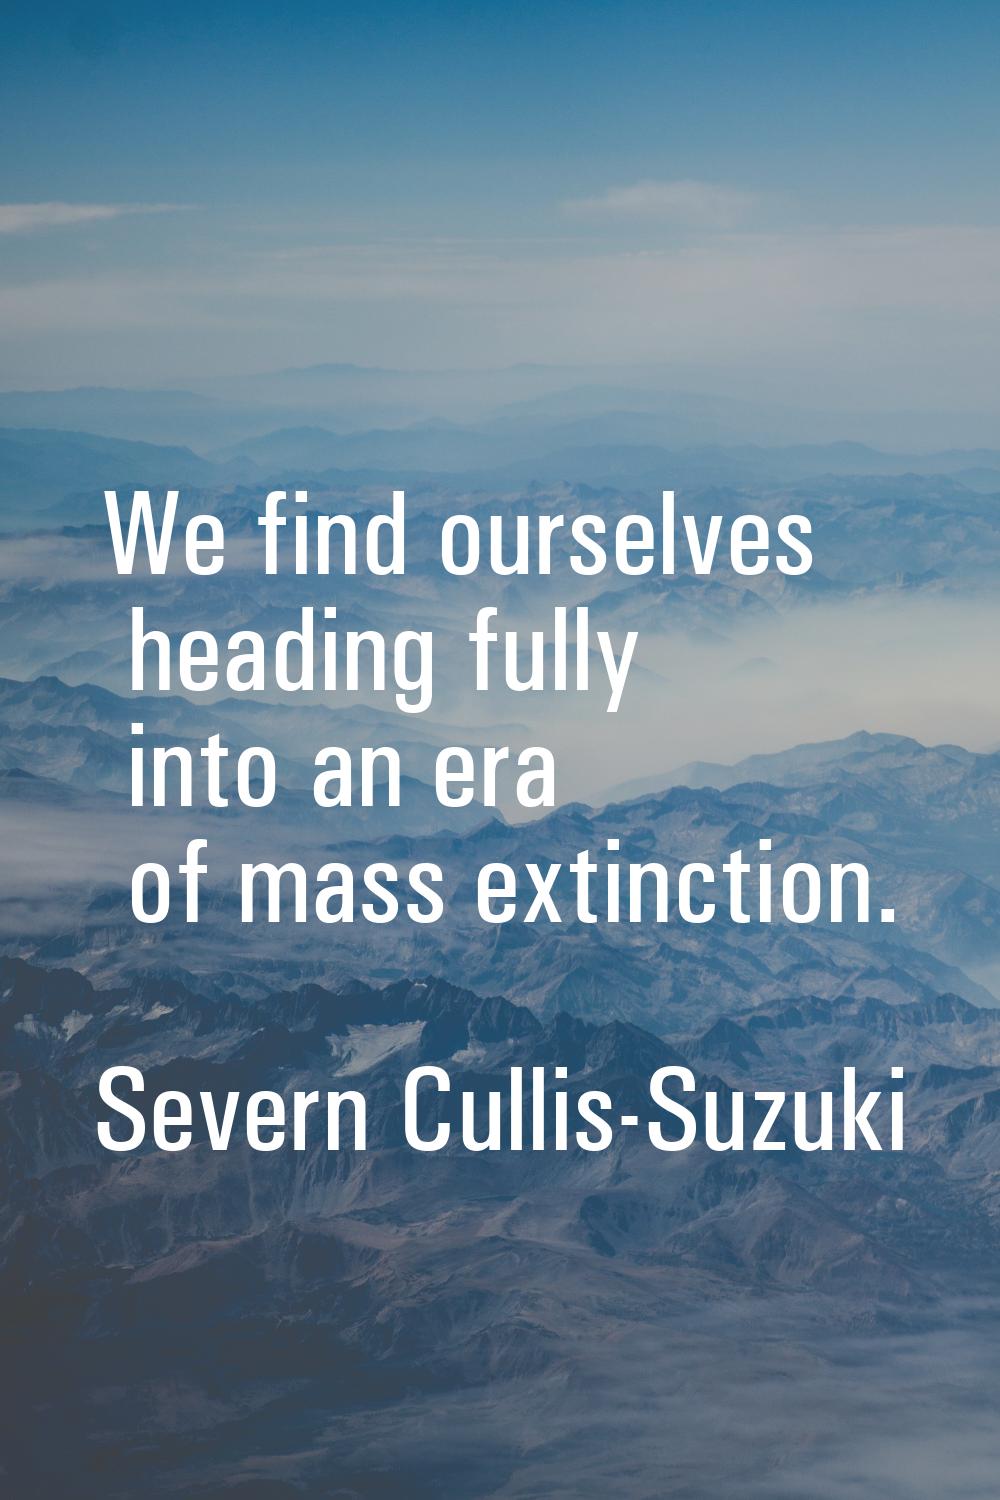 We find ourselves heading fully into an era of mass extinction.